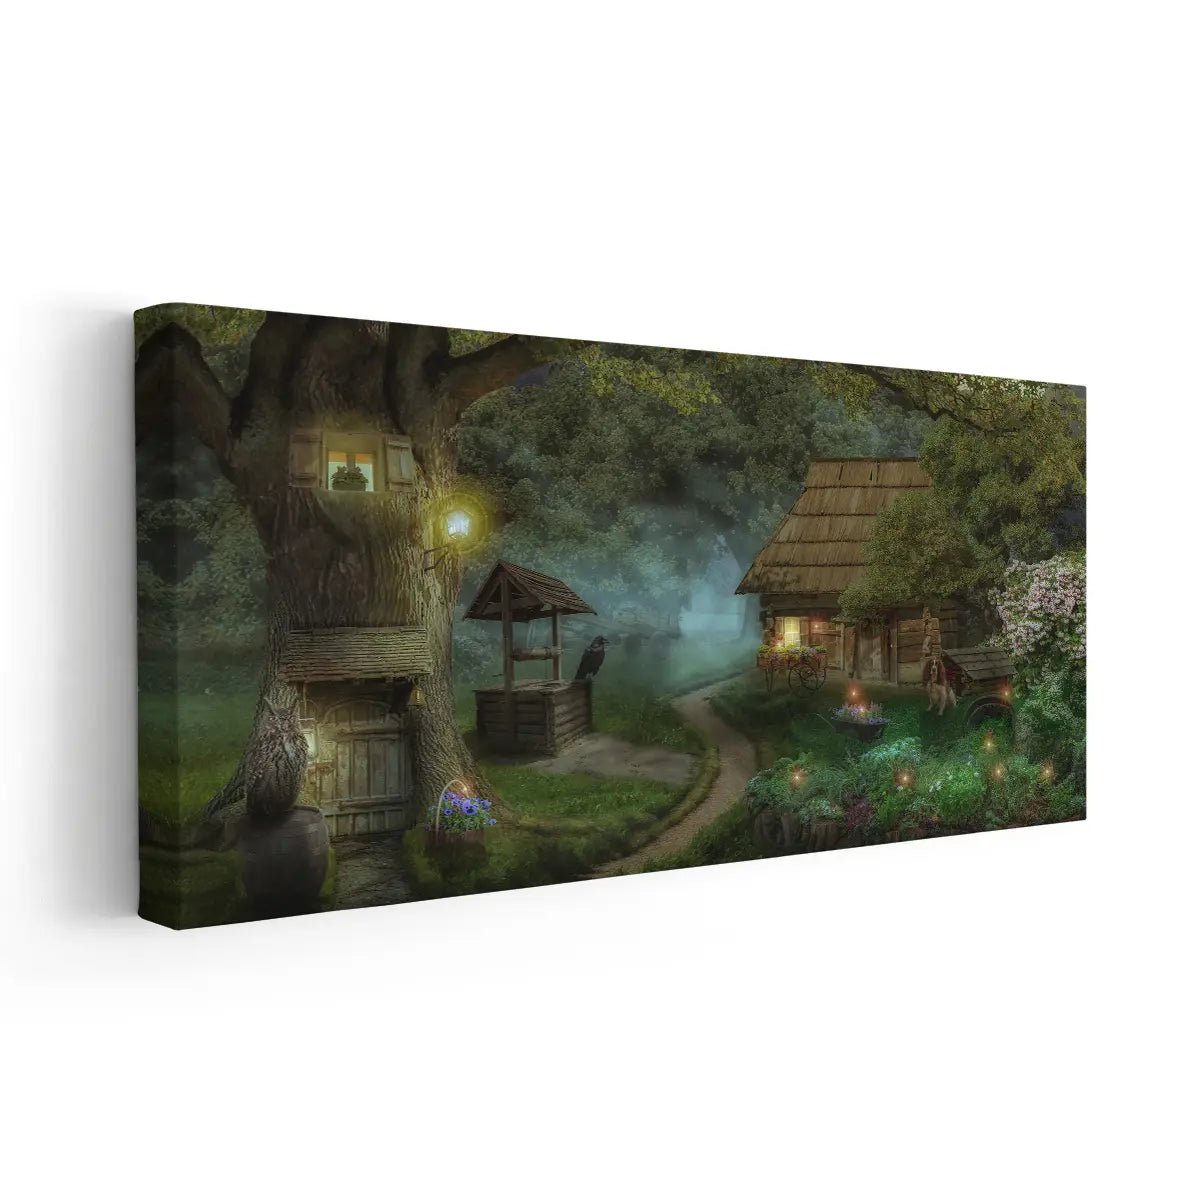 Fairytale House In The Forest Wall Art-Stunning Canvas Prints